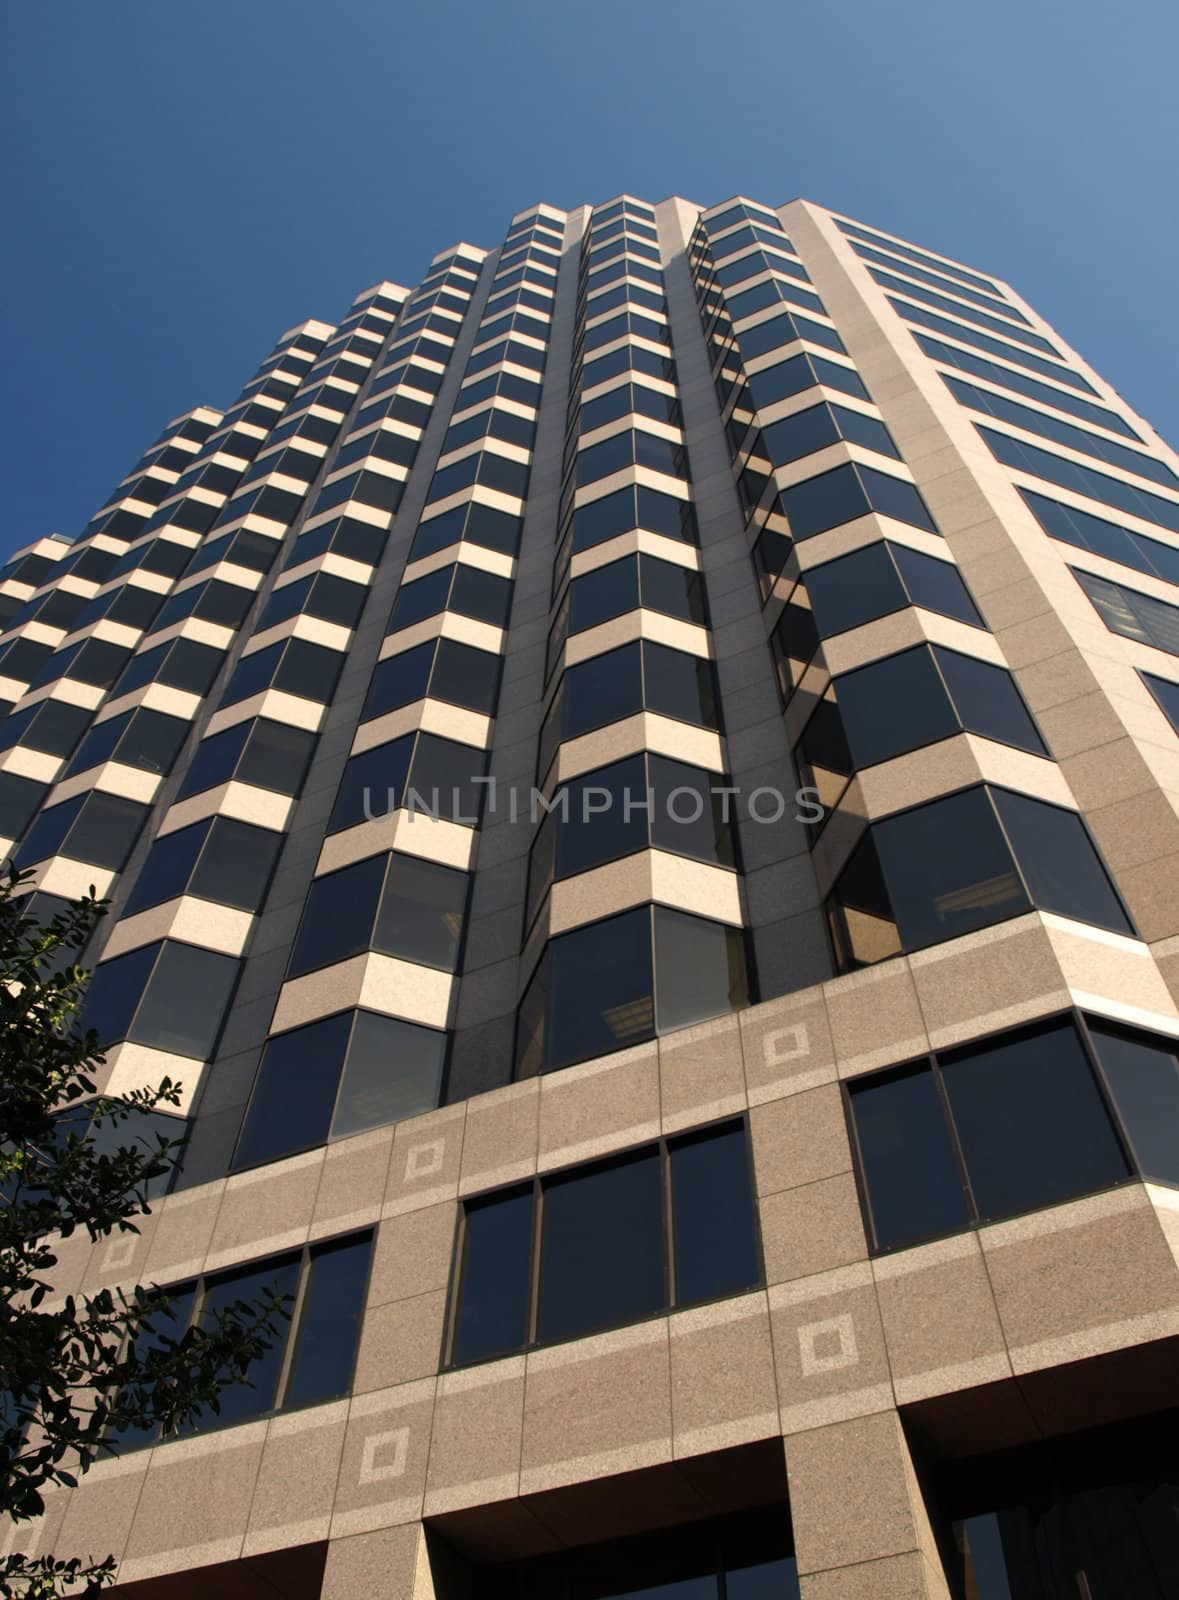 Tall office by northwoodsphoto